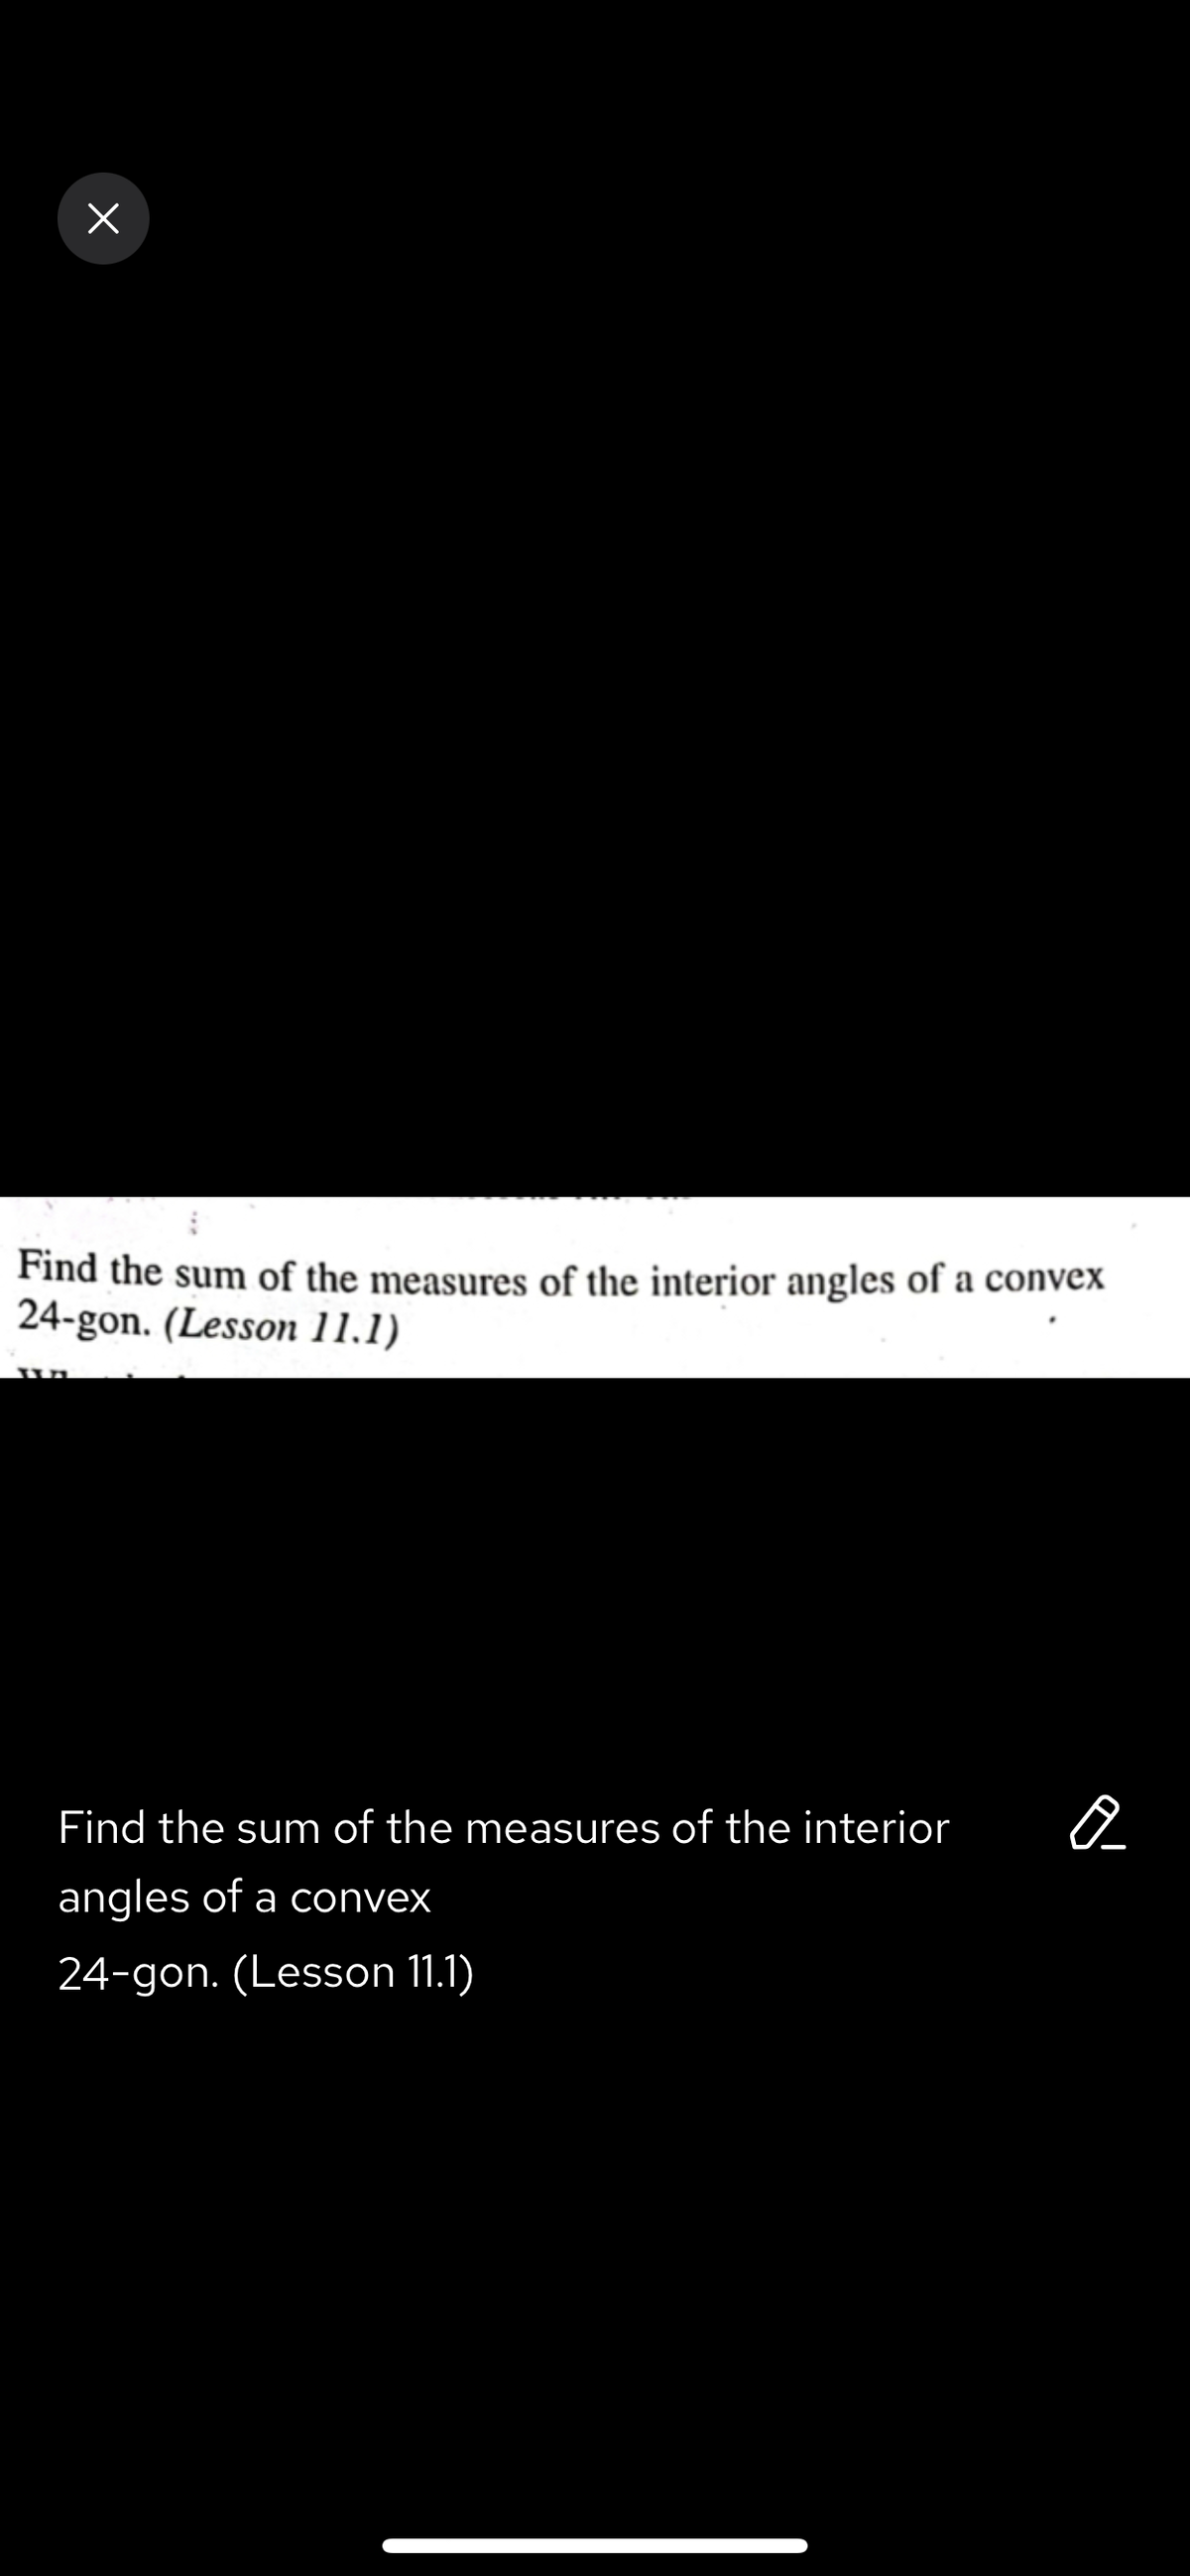 ×
Find the sum of the measures of the interior angles of a convex
24-gon. (Lesson 11.1)
Q
Find the sum of the measures of the interior
angles of a convex
24-gon. (Lesson 11.1)